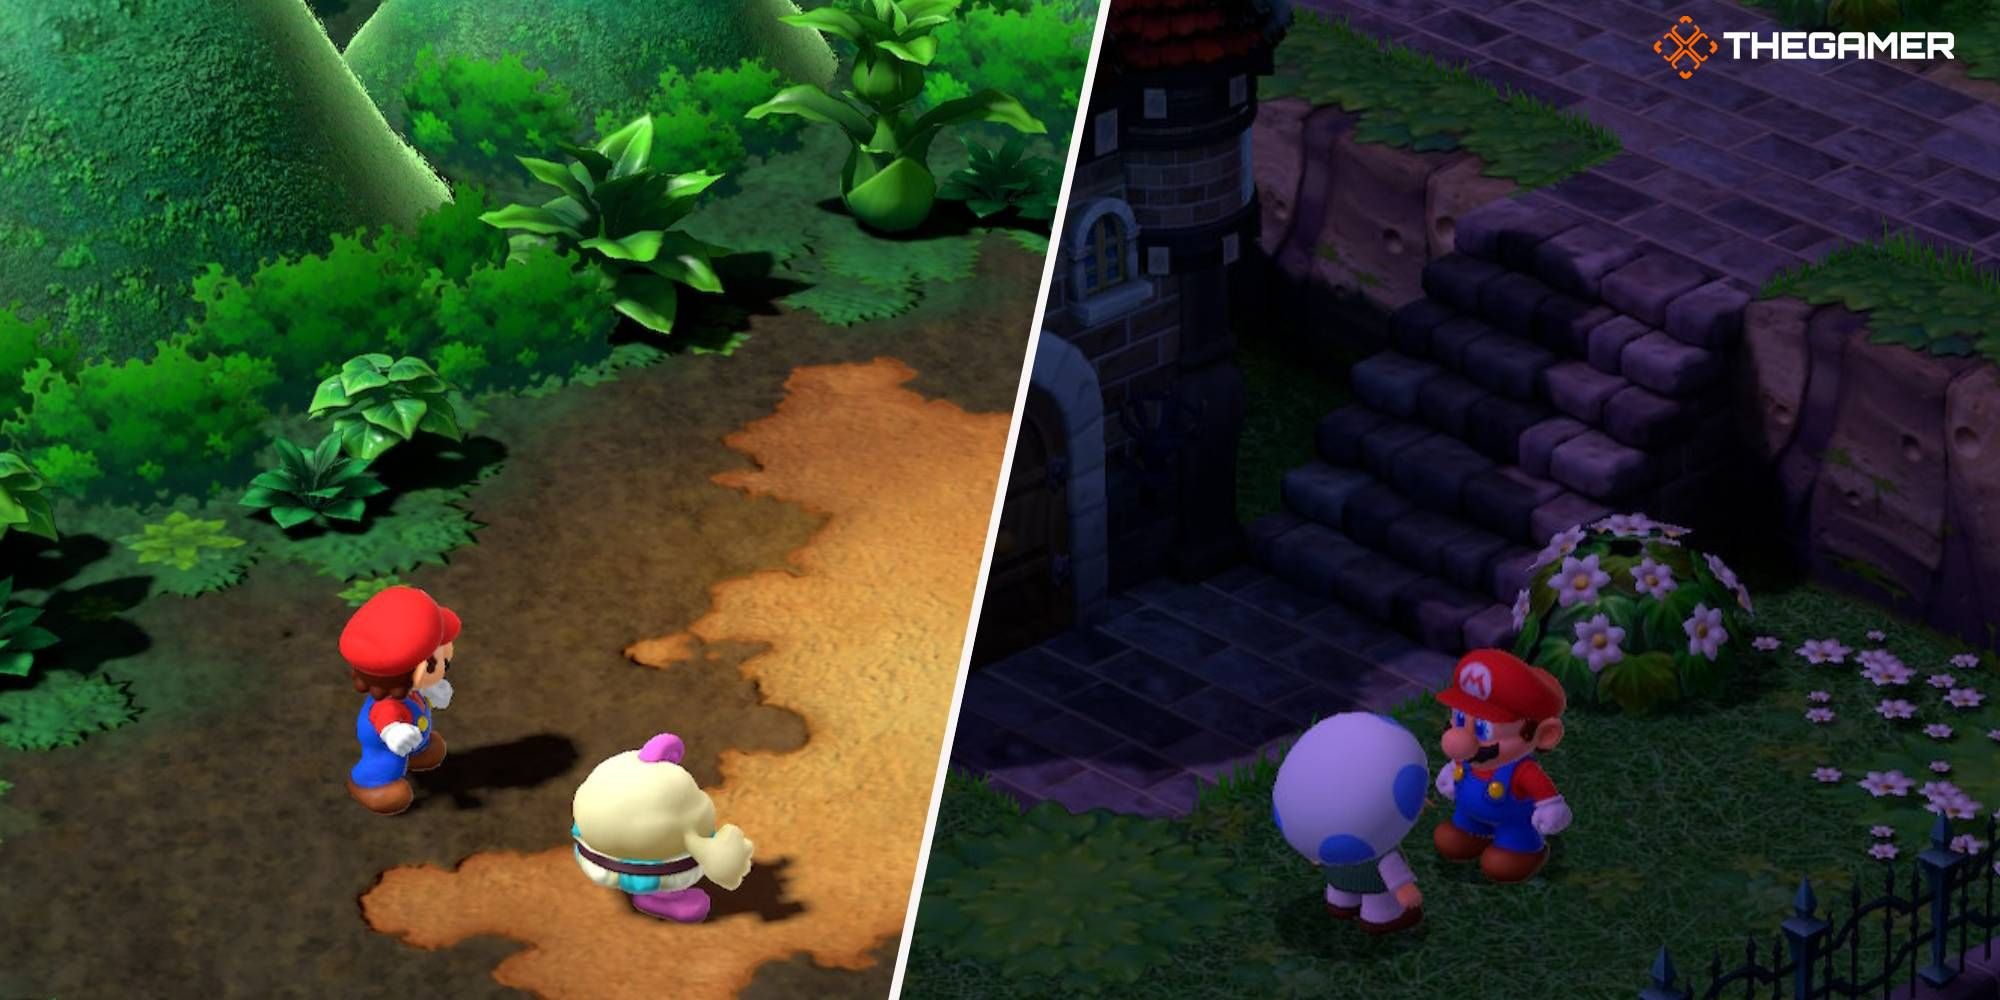 Mario and Mallow standing side by side and Mario talking to a Toad who gives him a Flower Tab in Super Mario RPG